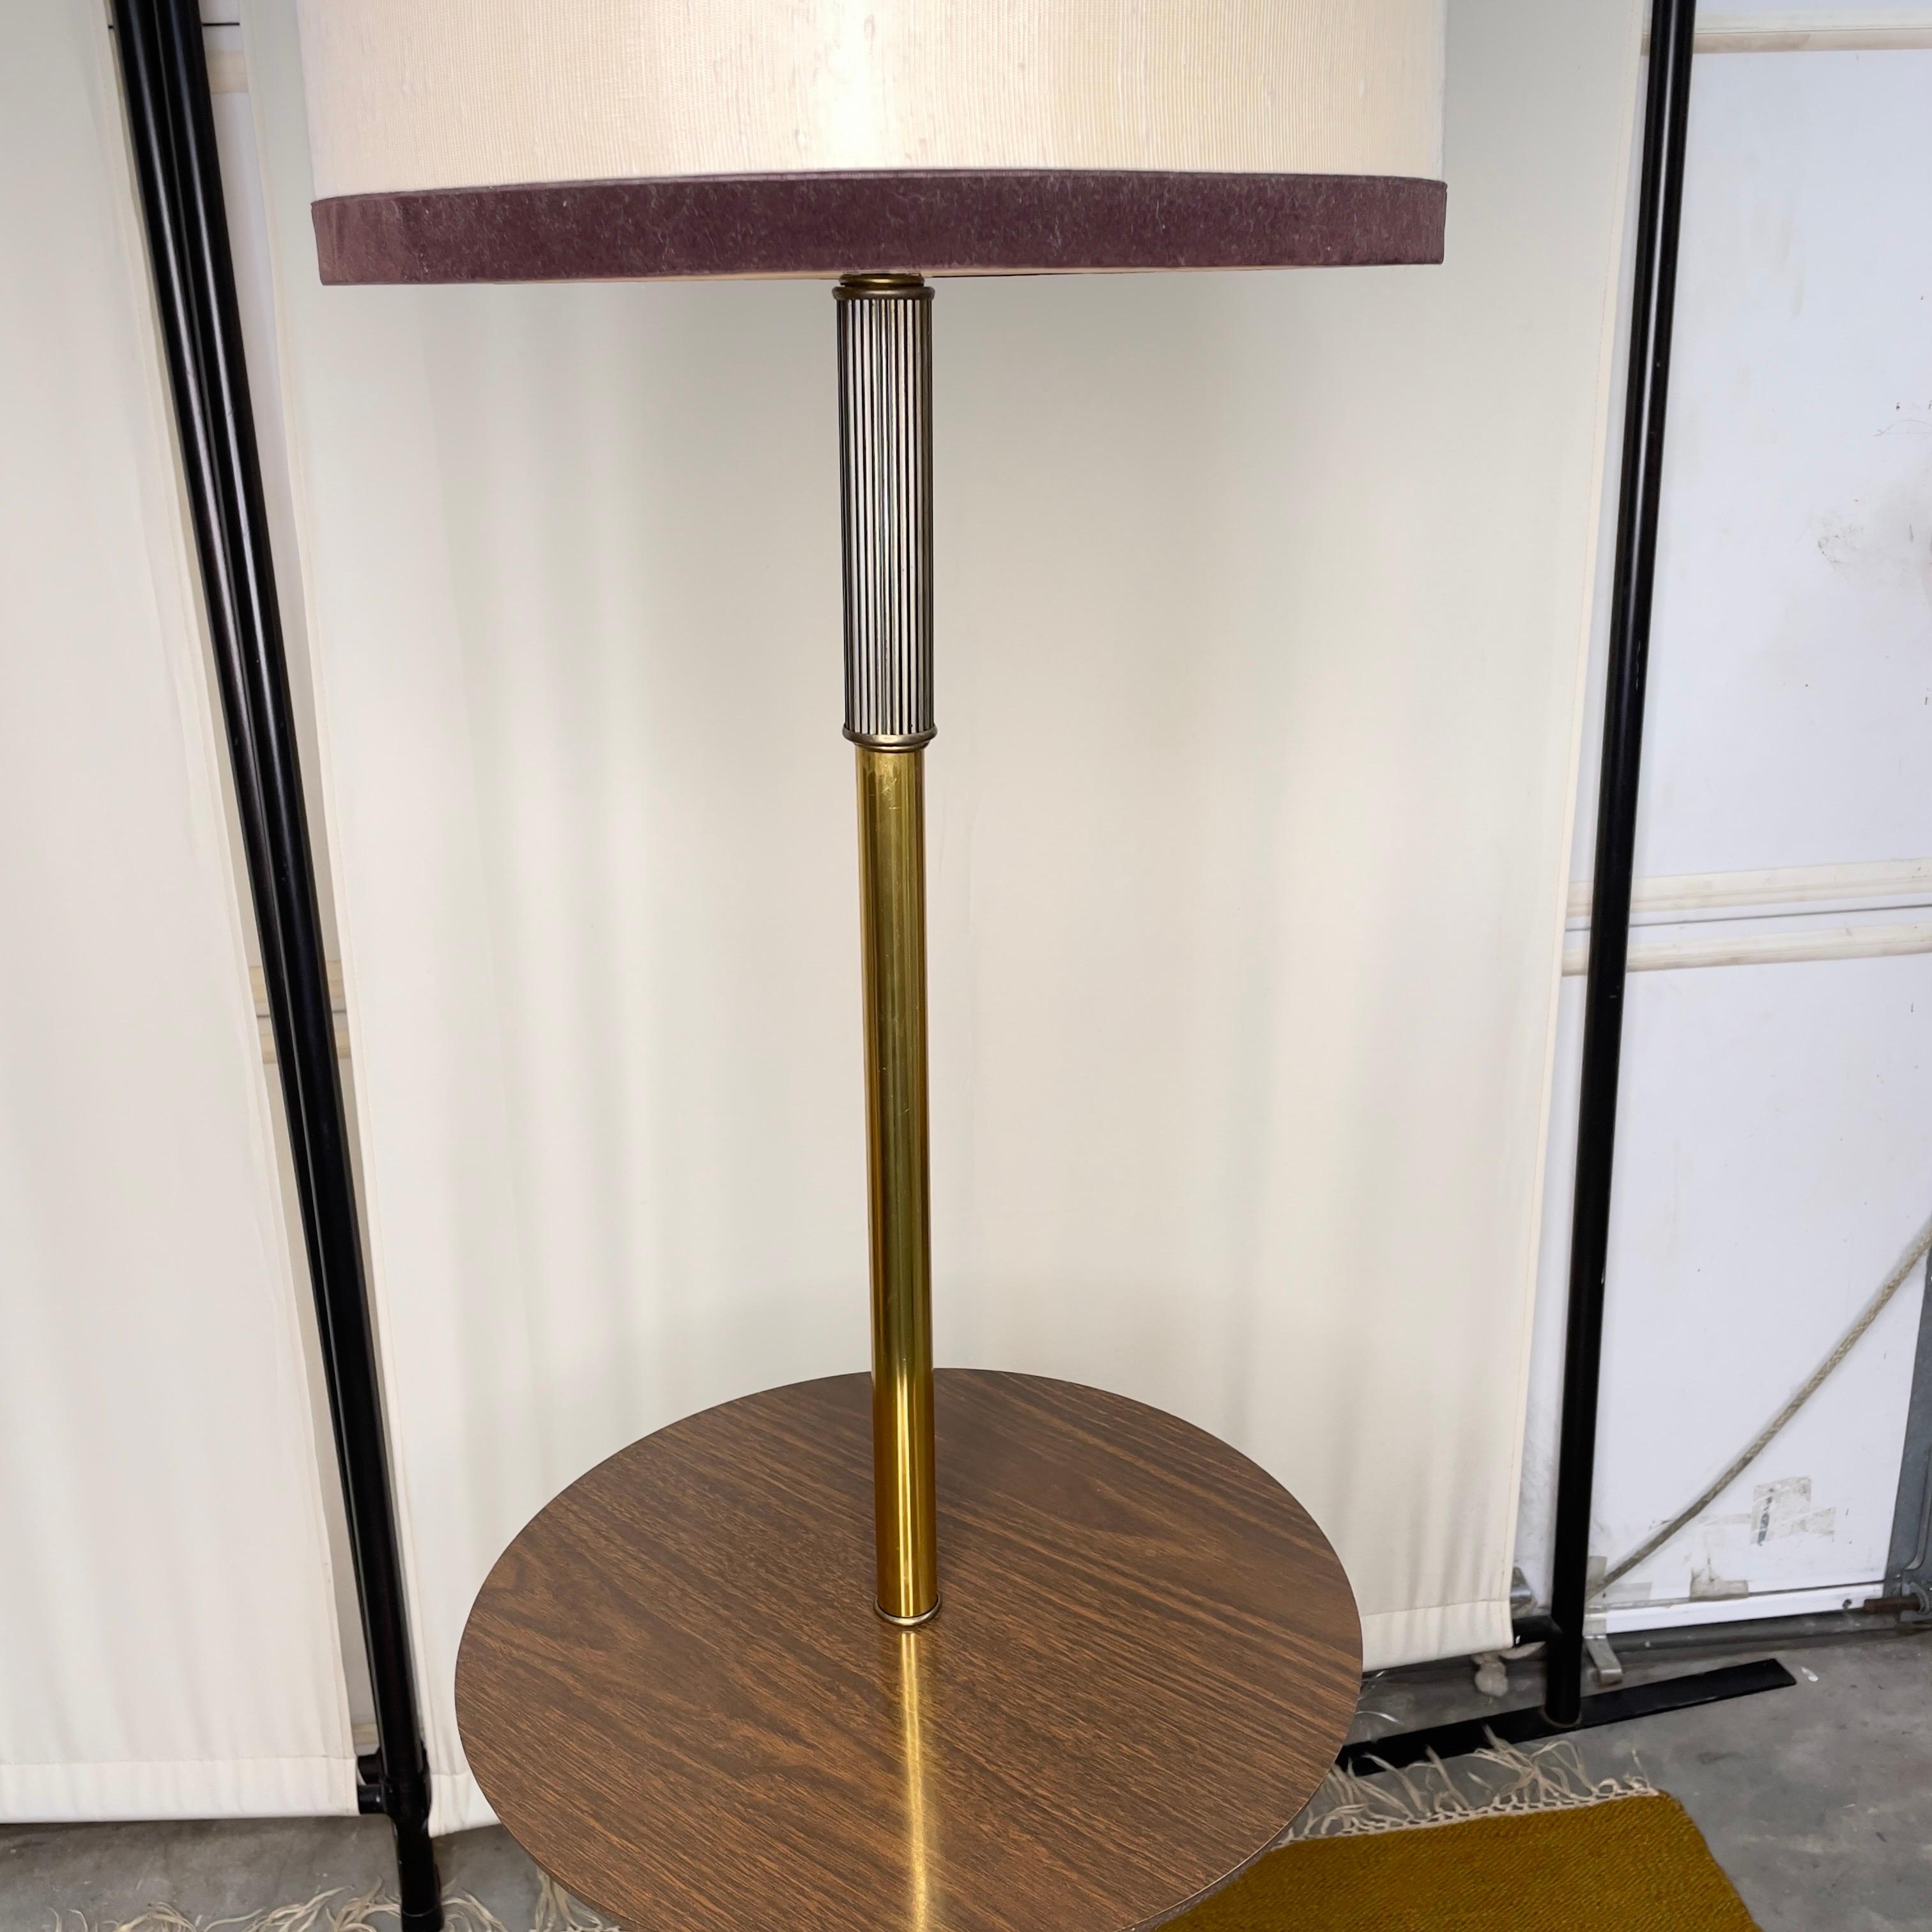 Mid 20th Century Modern Floor Lamp With Table and Lampshade In Good Condition For Sale In Cordova, SC